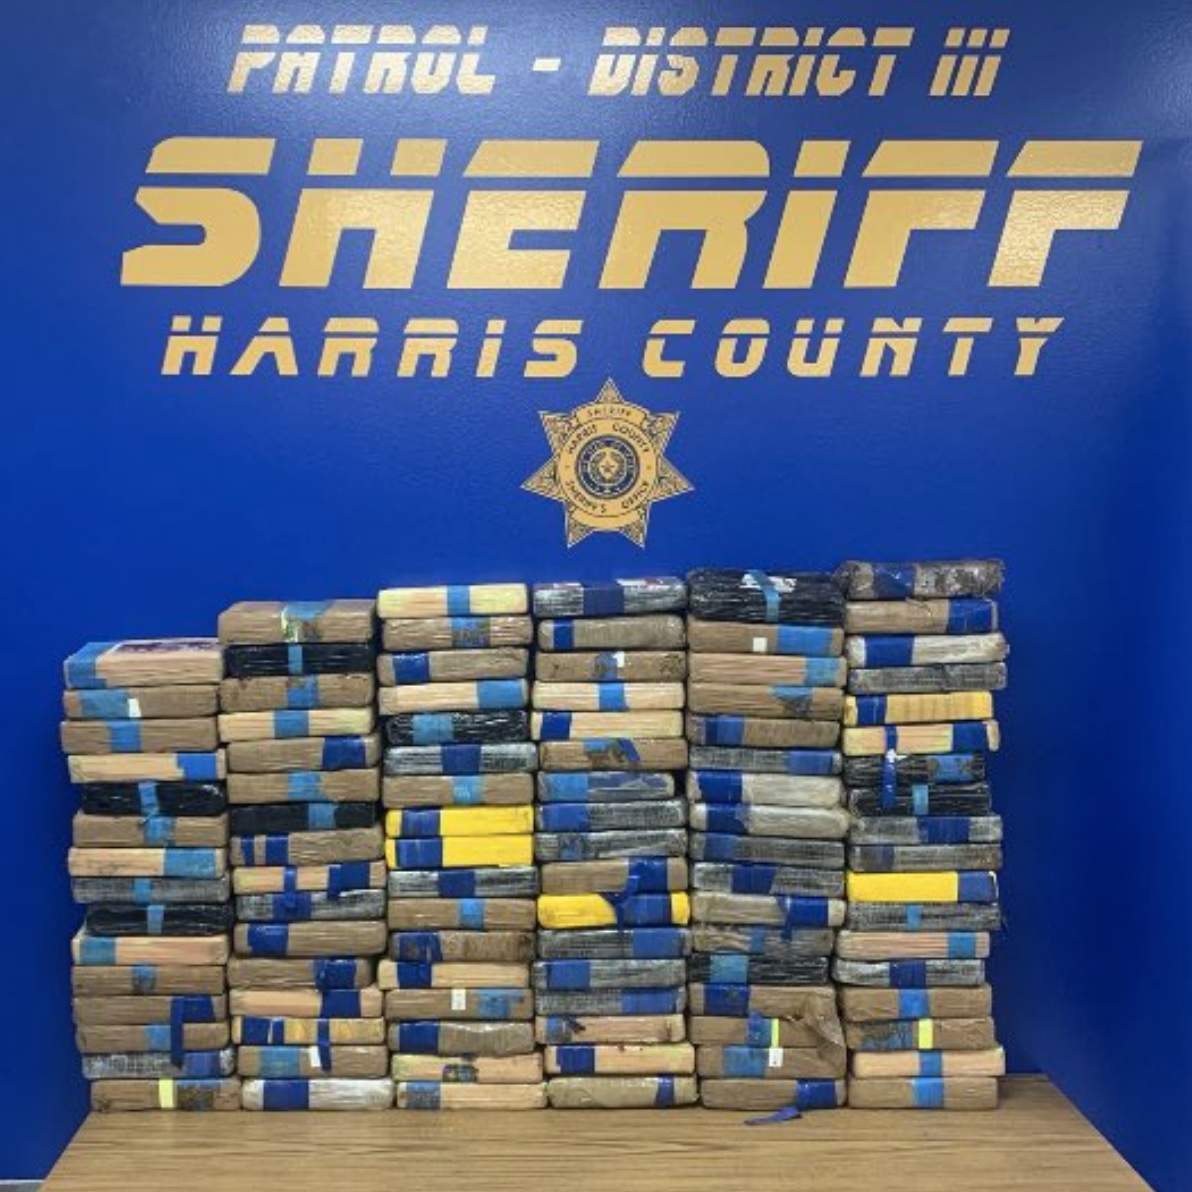 100 kilos of cocaine seized during traffic stop by HCSO deputies